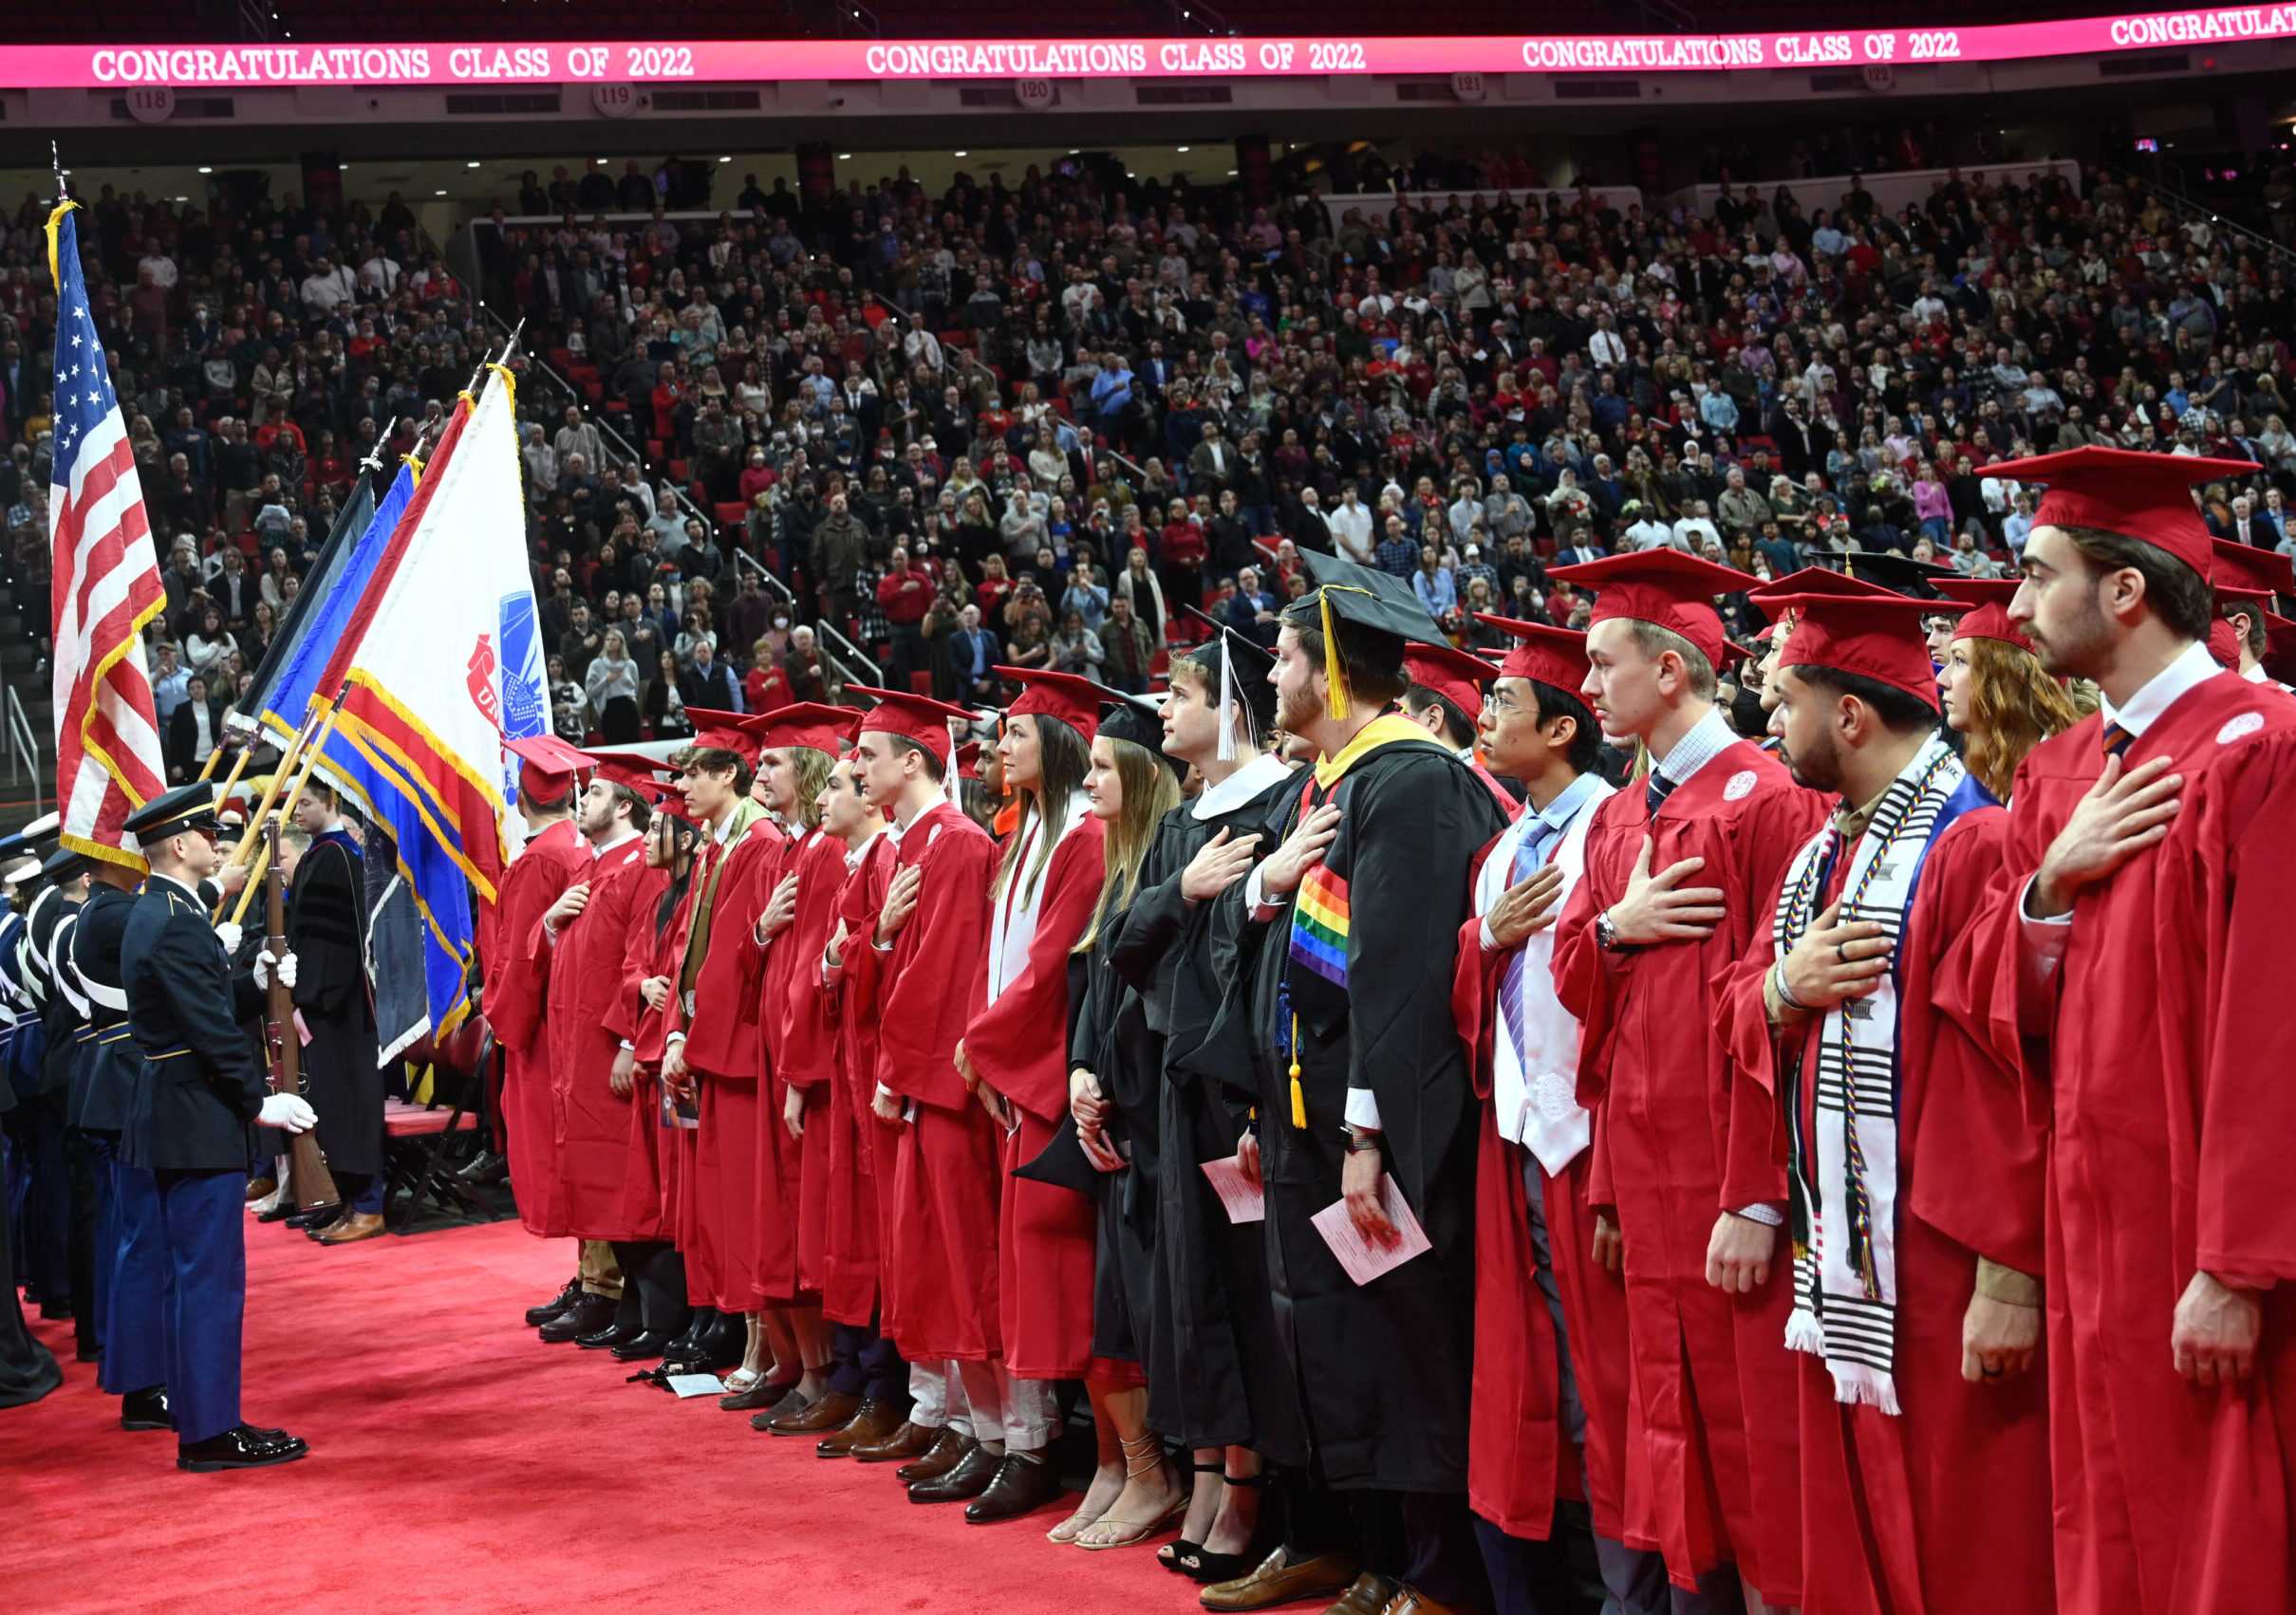 Pledge of Allegiance at Fall 2022 Commencement.